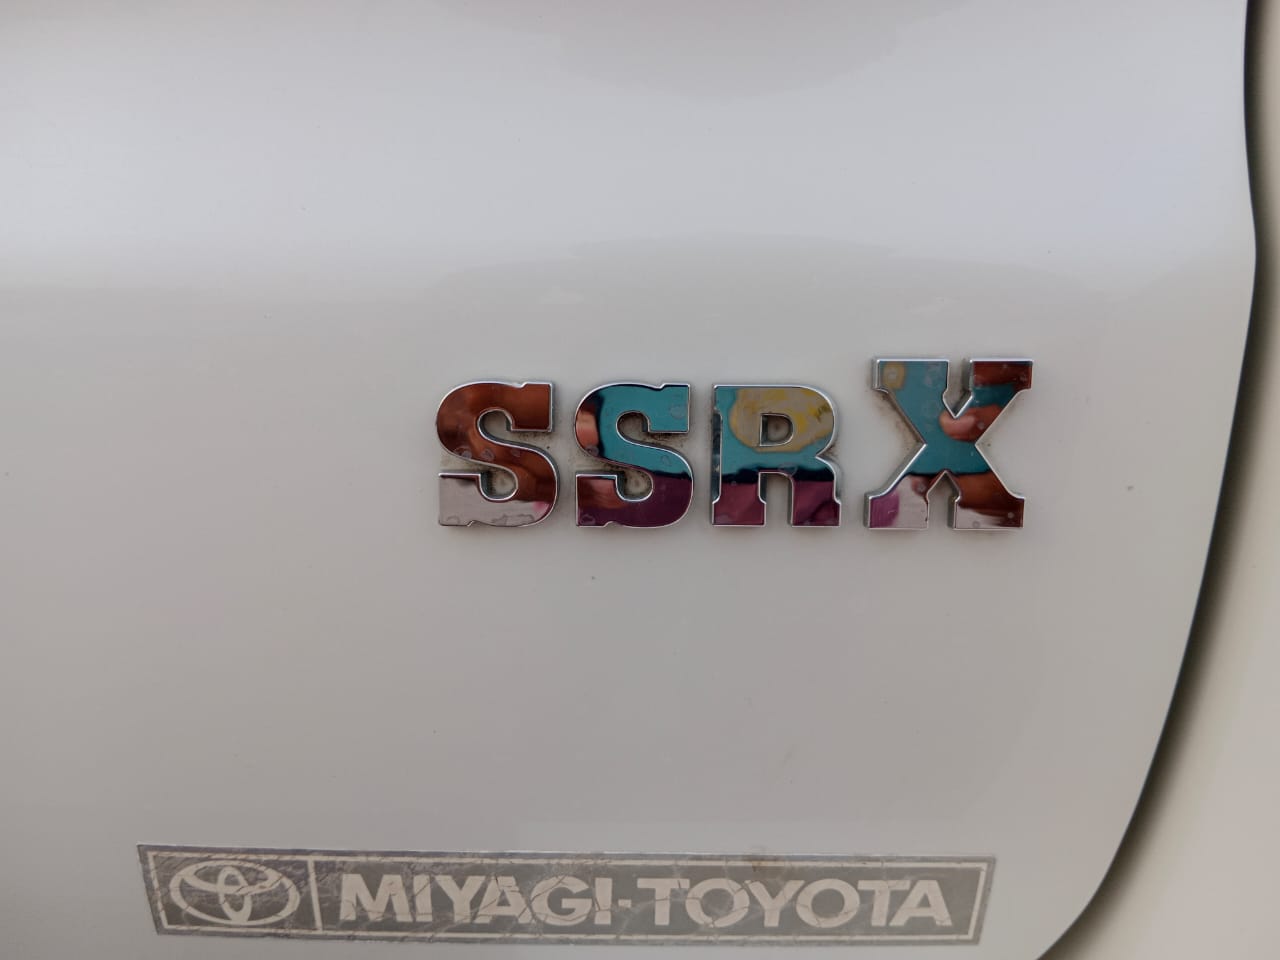 9401 TOYOTA HILUX SURF 2.7 A/T WHITE